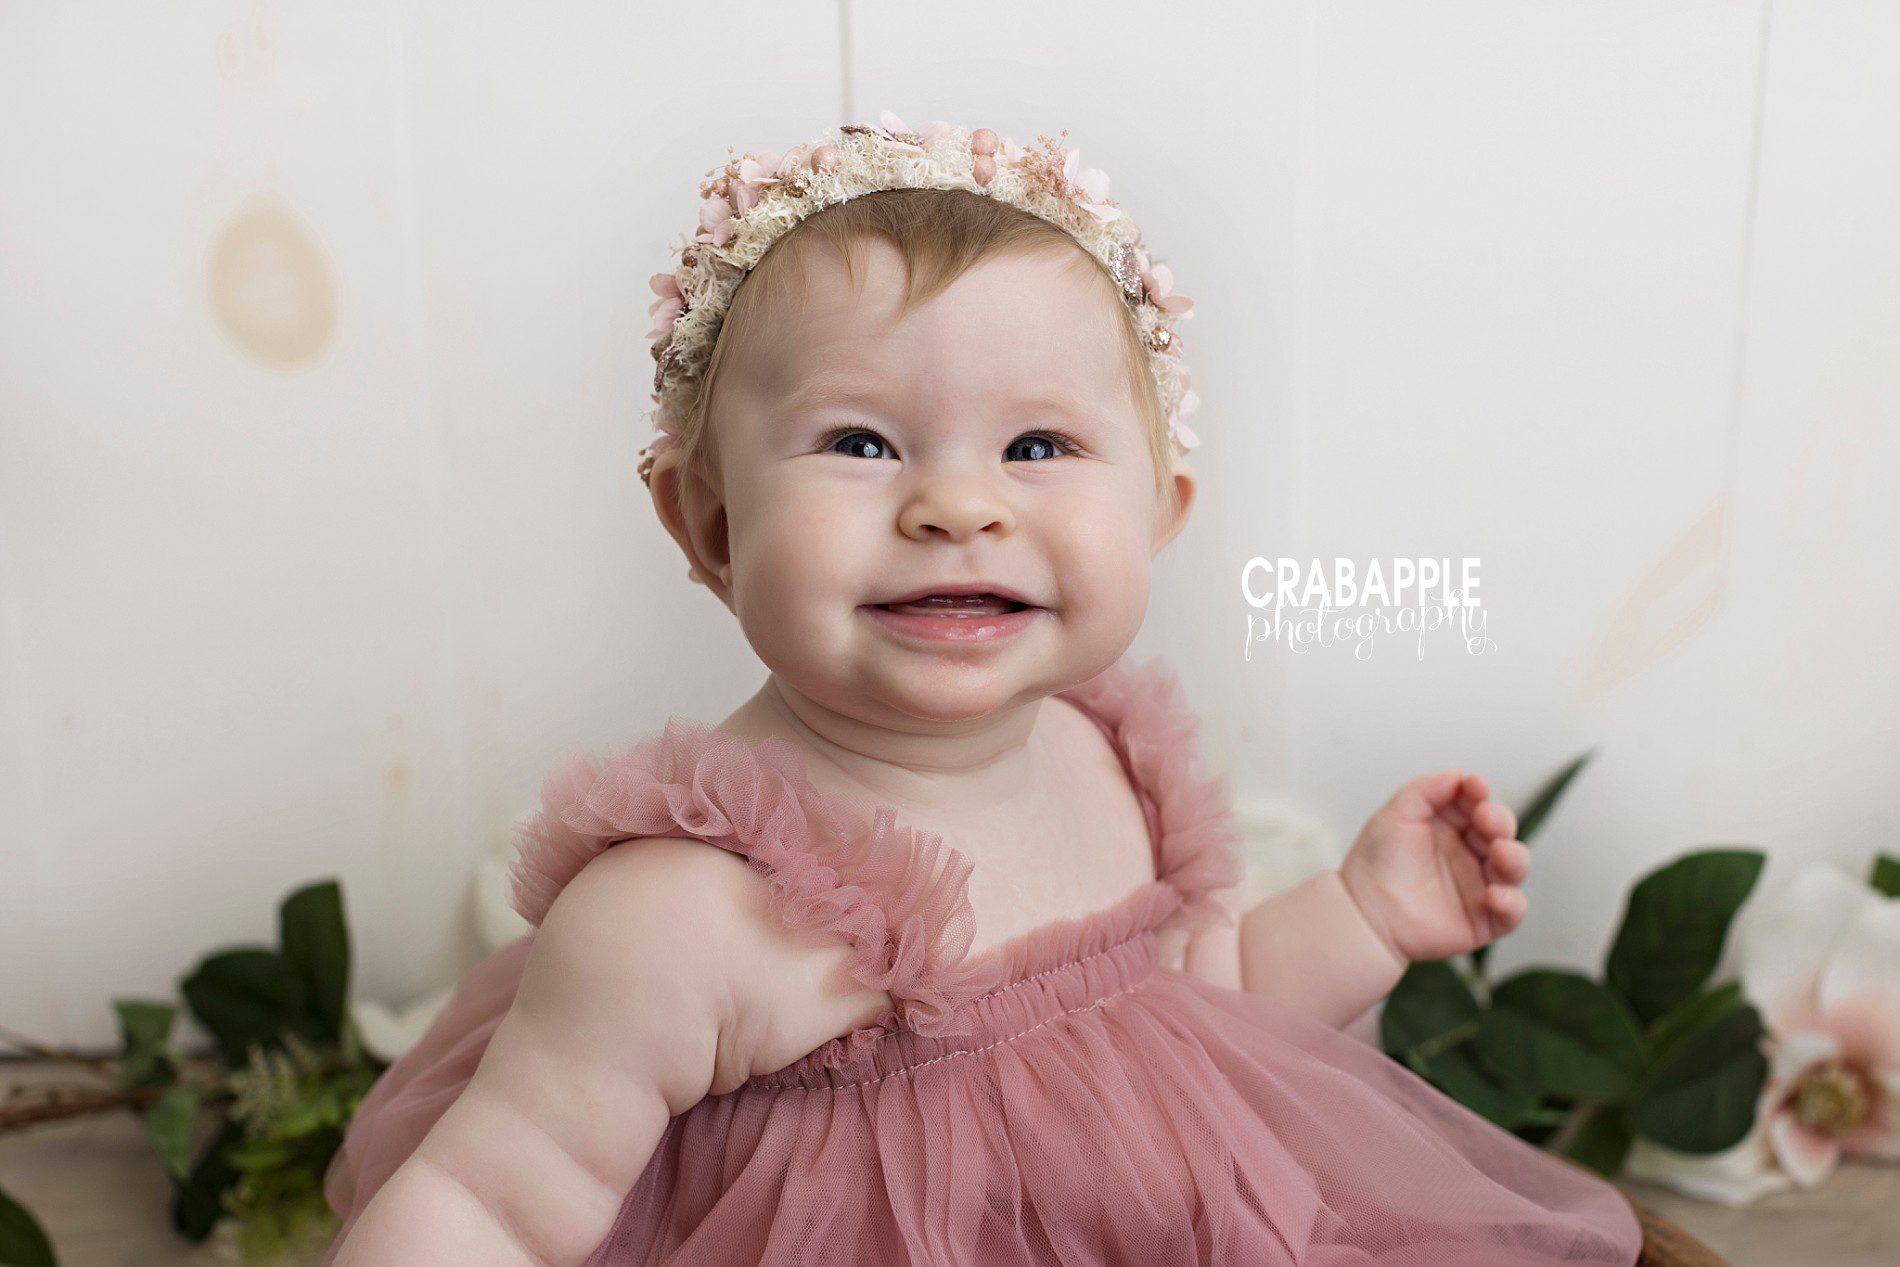 tulle dress and headband for baby photos